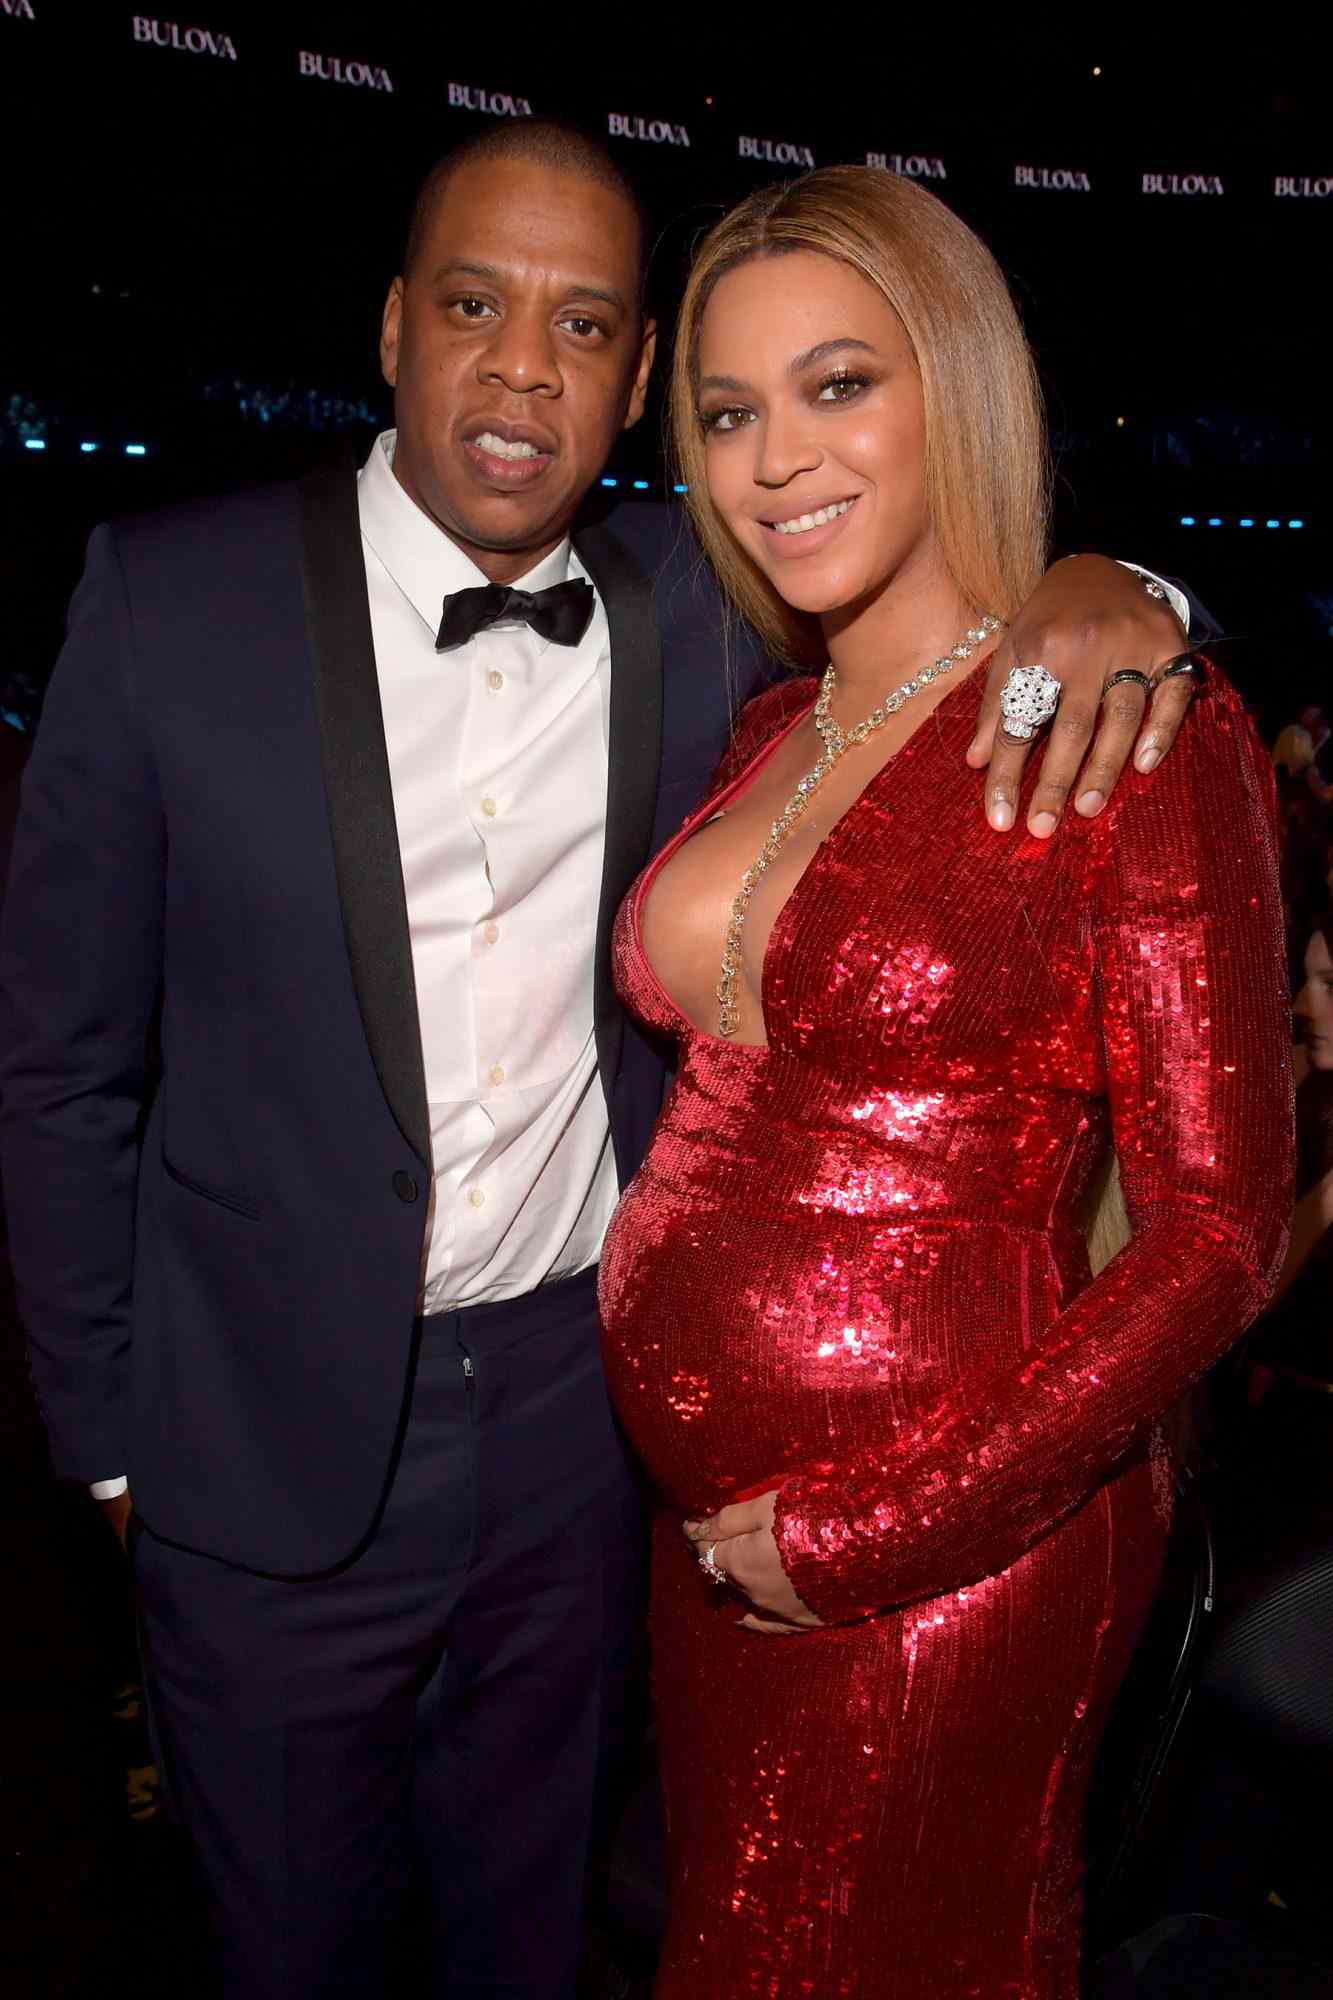 Beyoncé and Jay-Z at the 59th Grammy Awards at the Staples Center on Feb. 12, 2017